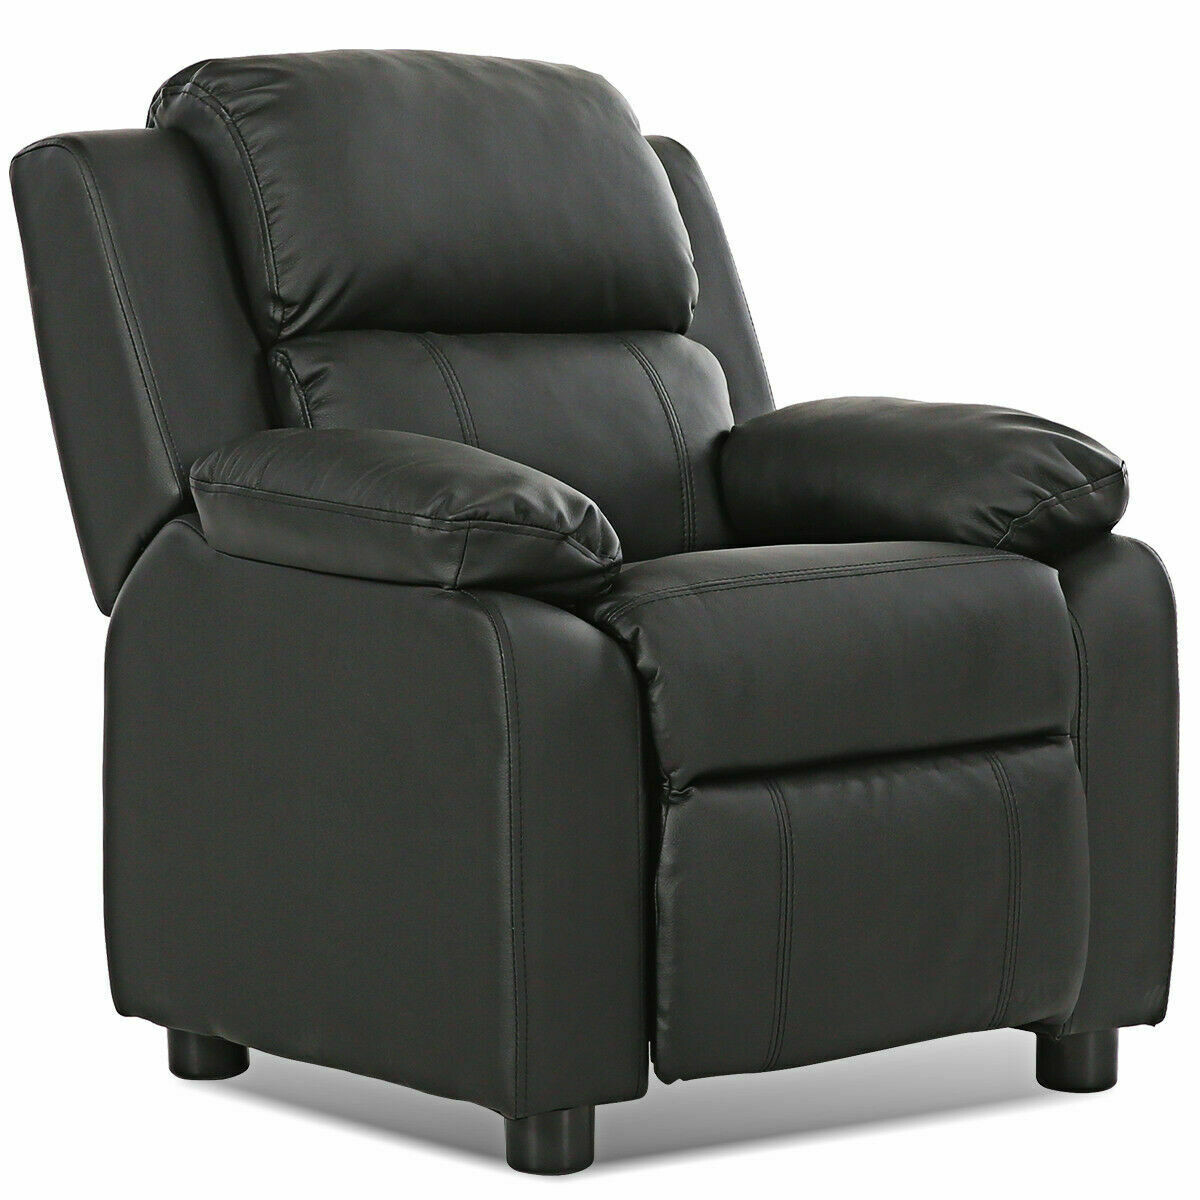 Kids Deluxe Headrest  Recliner Sofa Chair with Storage Arms-Black - Color: Black